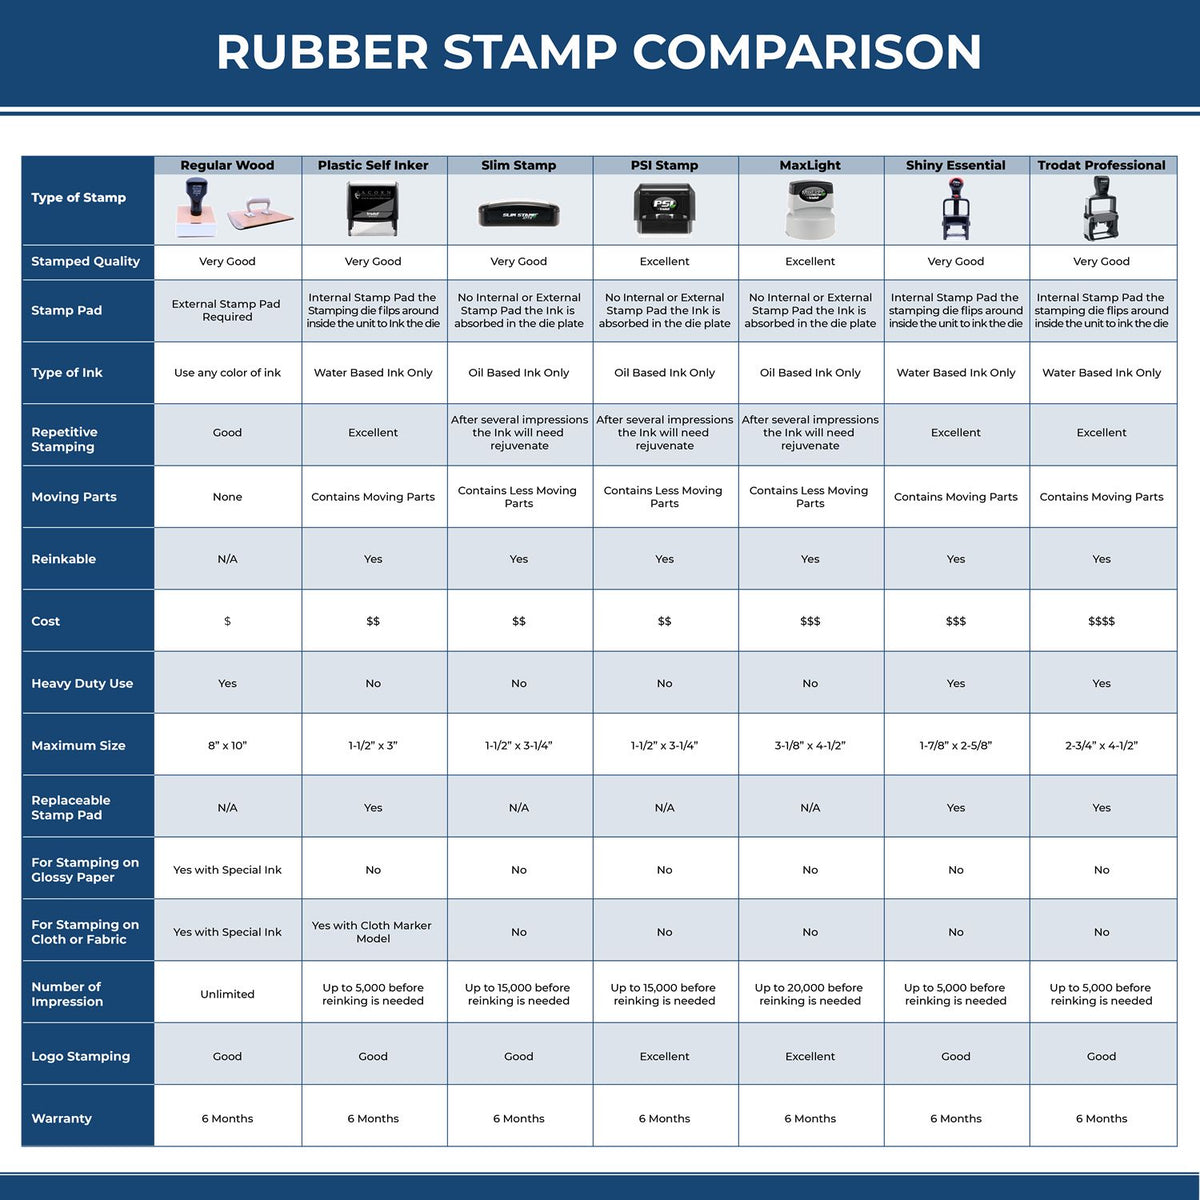 Large Pre-Inked X-Rays Stamp 4981SLIM Rubber Stamp Comparison